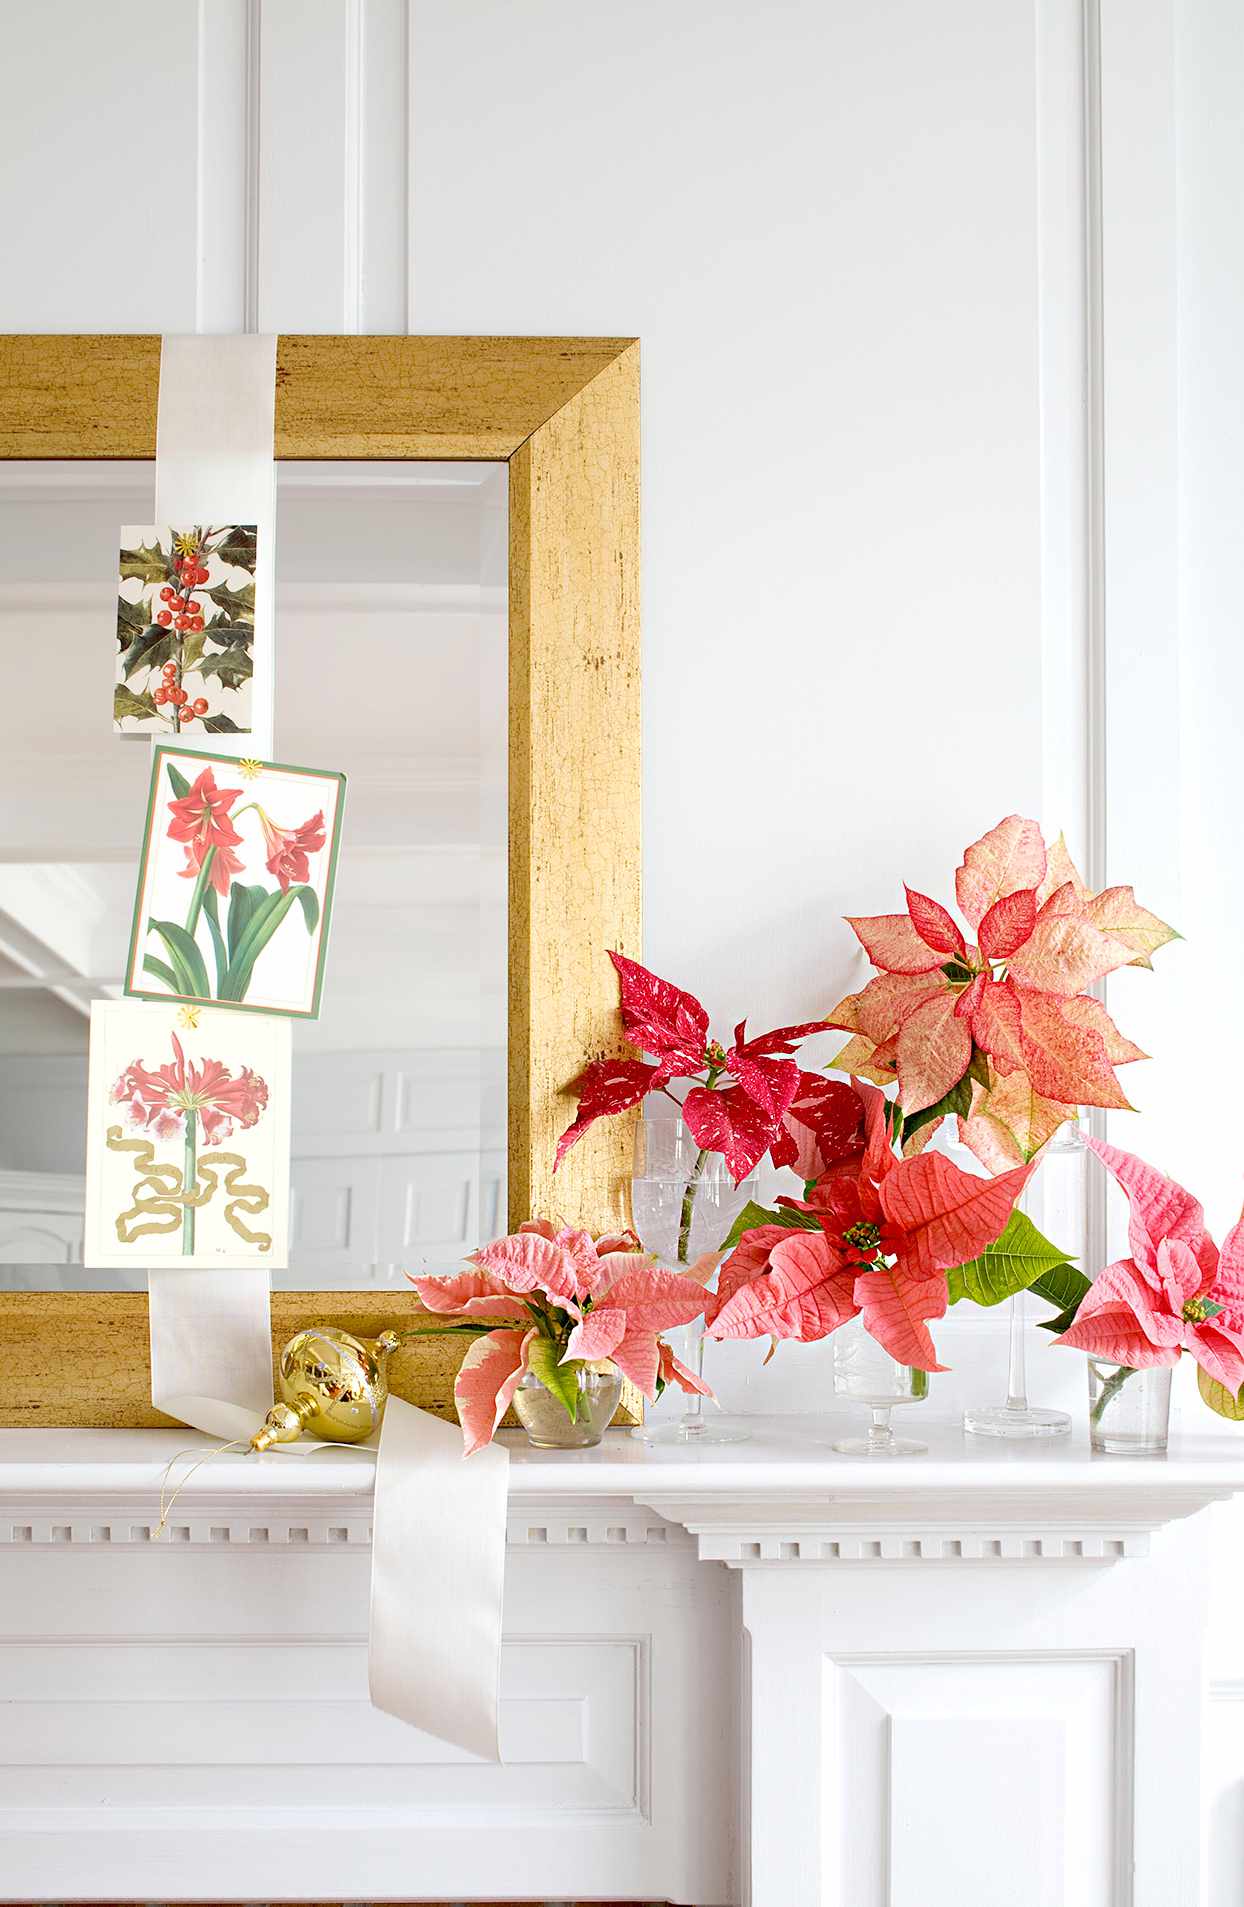 Mantel with poinsettias and mirror